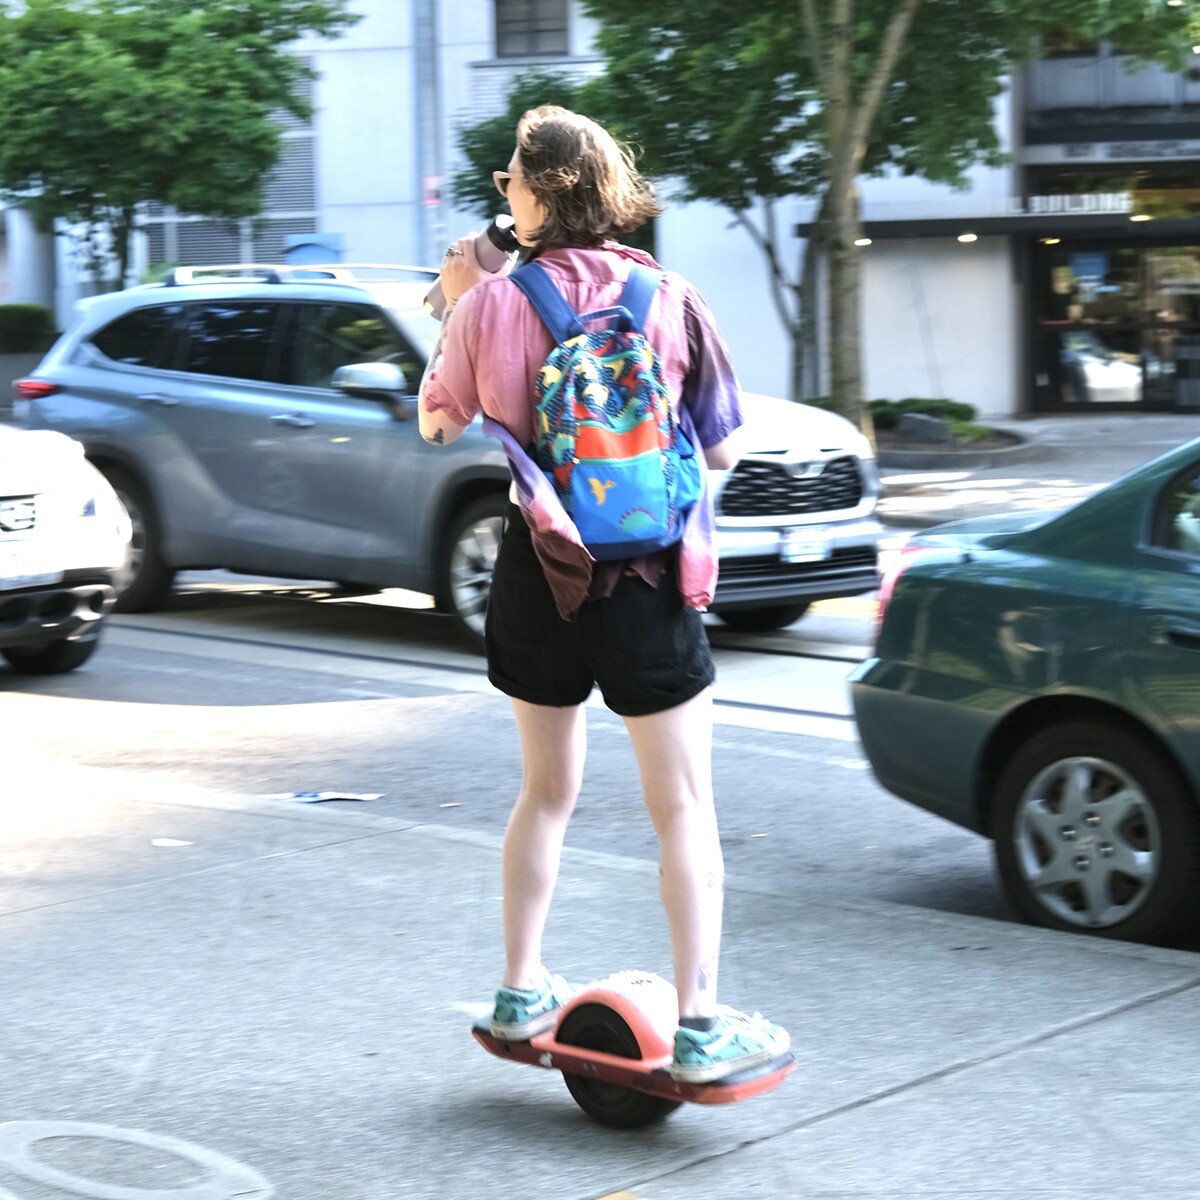 A person riding a One Wheel in the bike lane in Capitol Hill, Seattle.